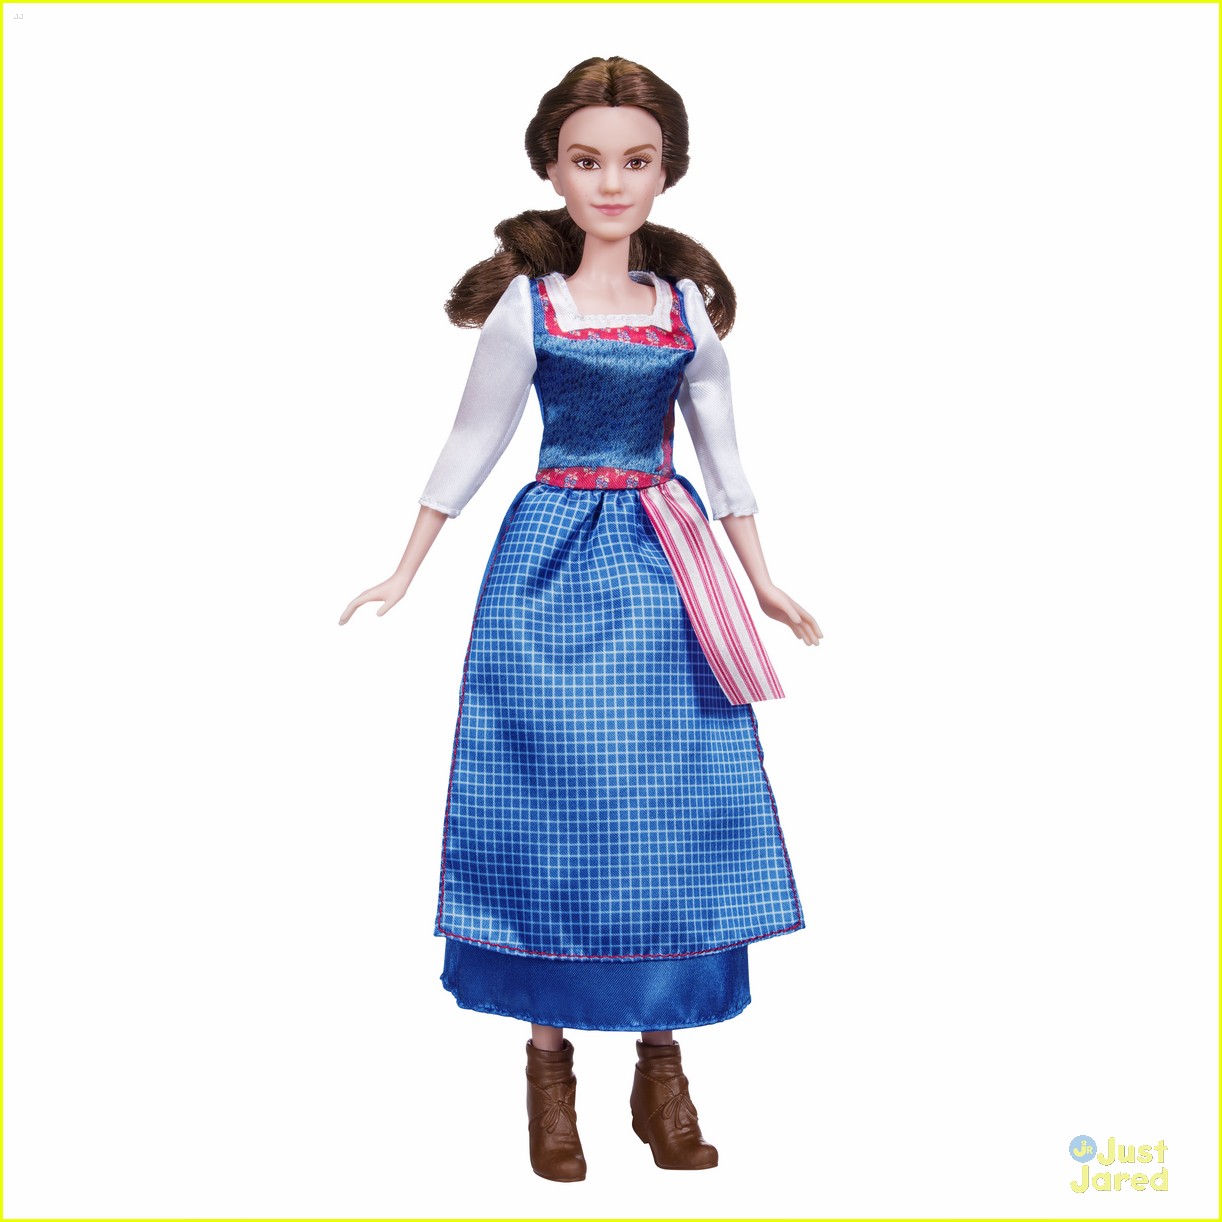 beauty beast doll collection contest 03